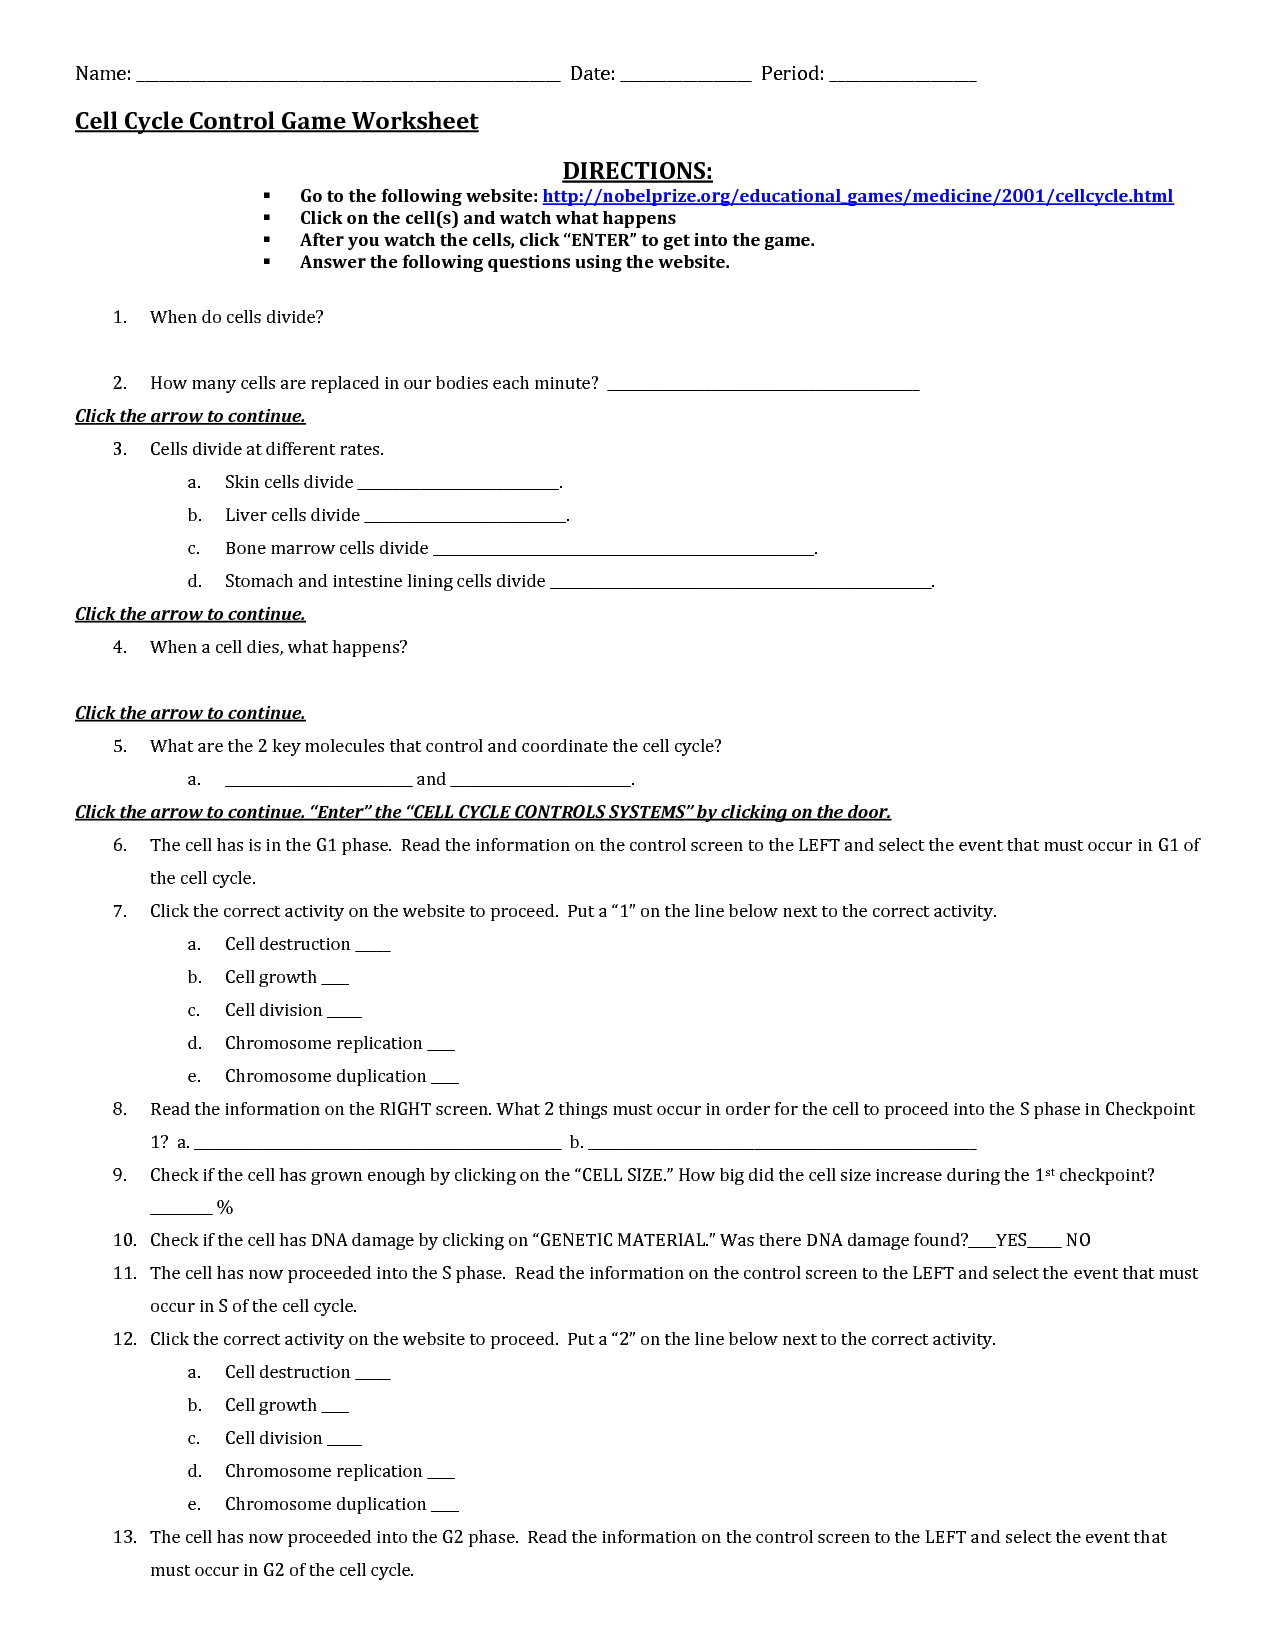 18 Best Images of Cell Cycle Worksheet  Cell Cycle Worksheet Answers, Cell Cycle Worksheet 